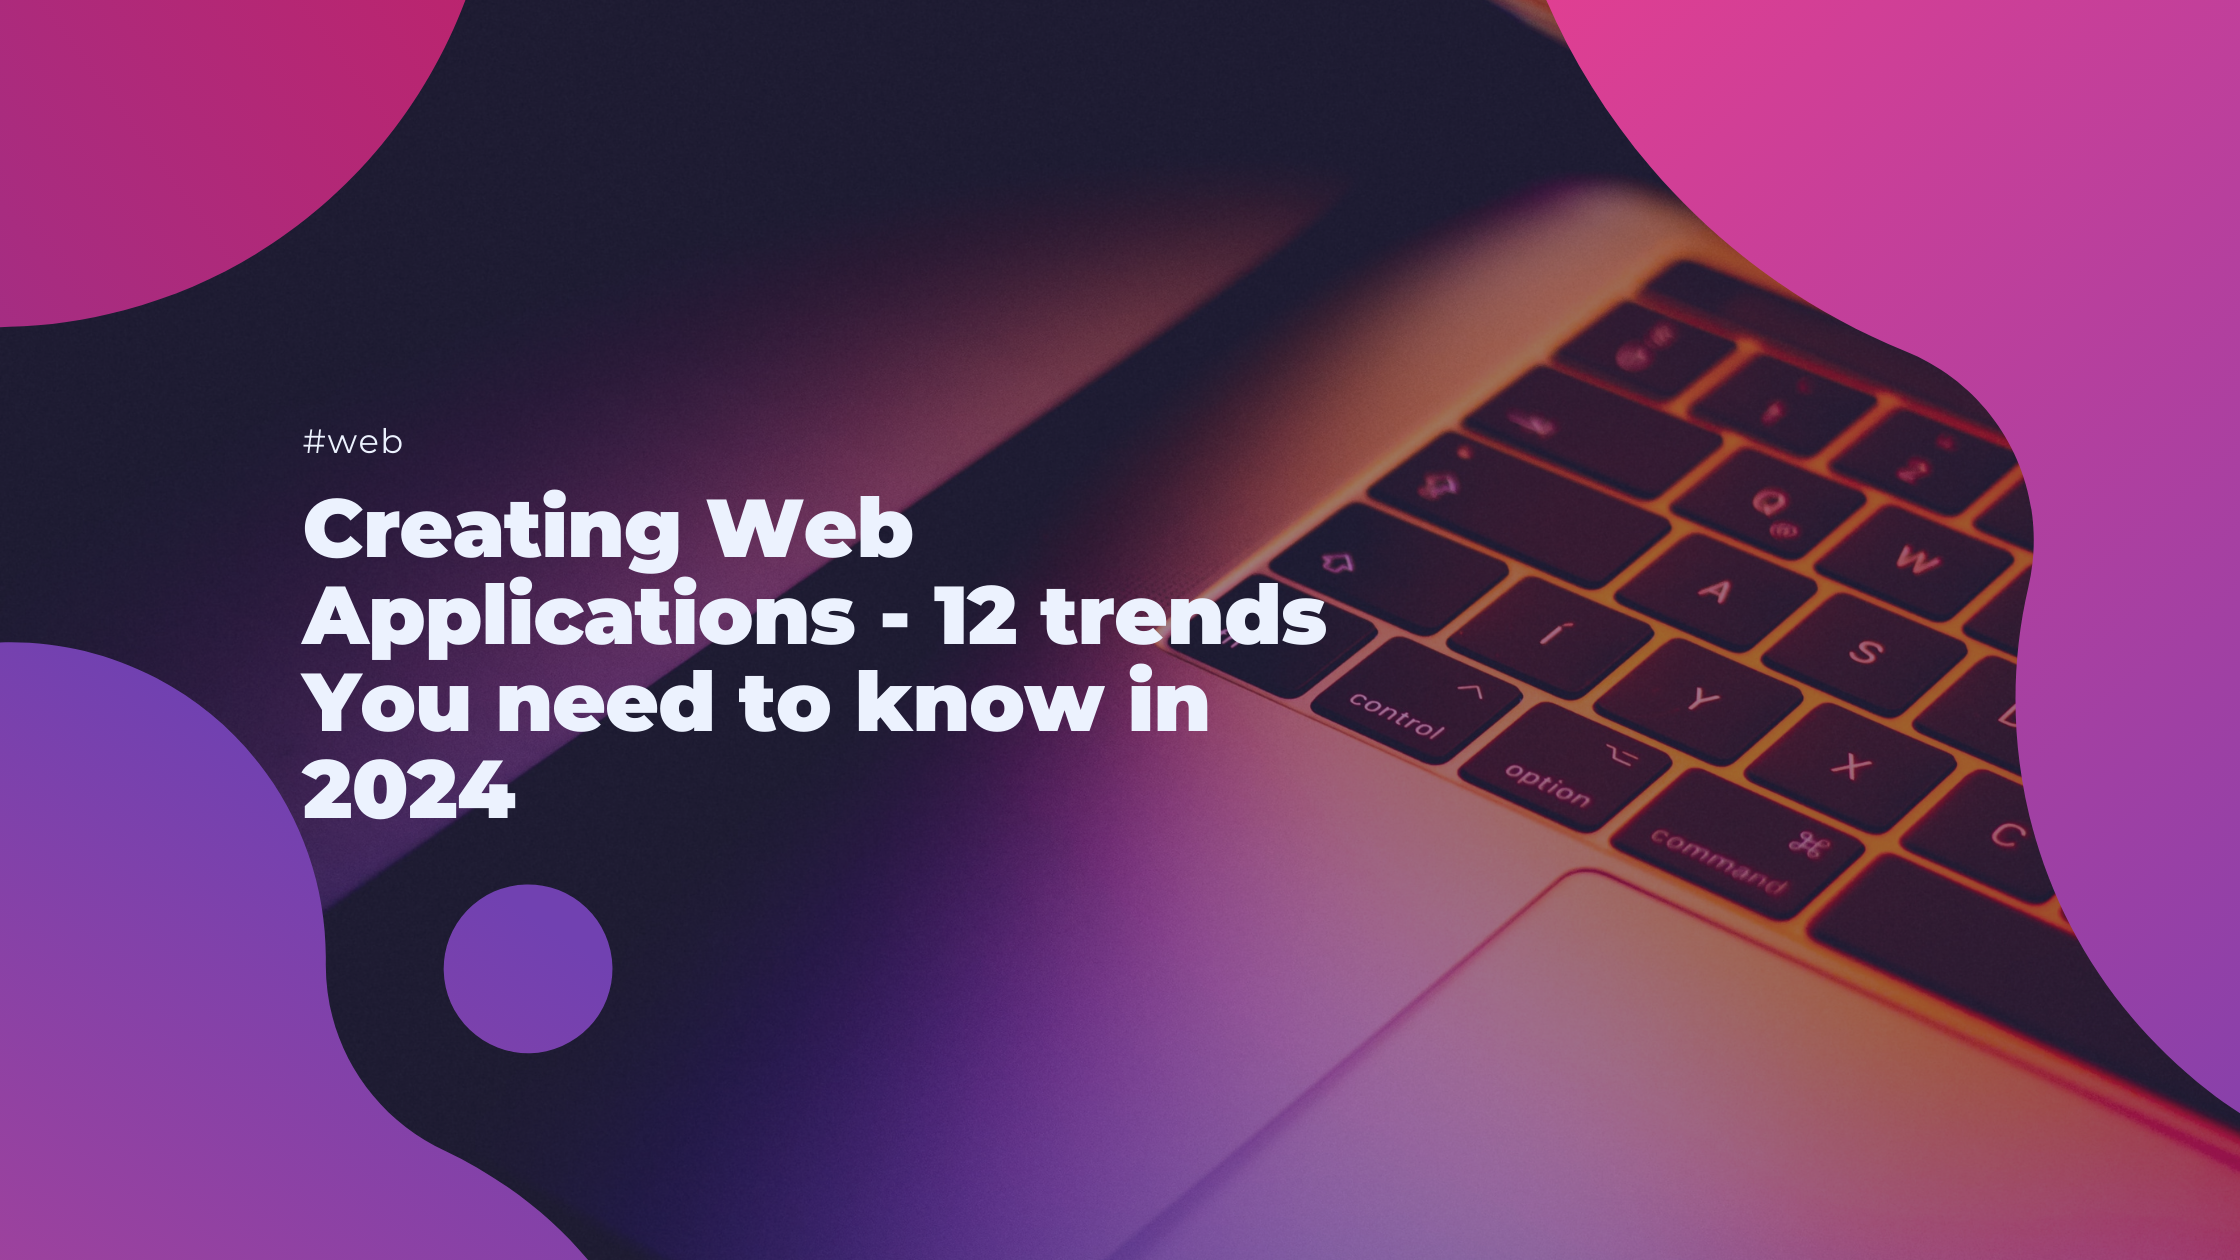 Creating Web Applications - 12 trends You need to know in 2024